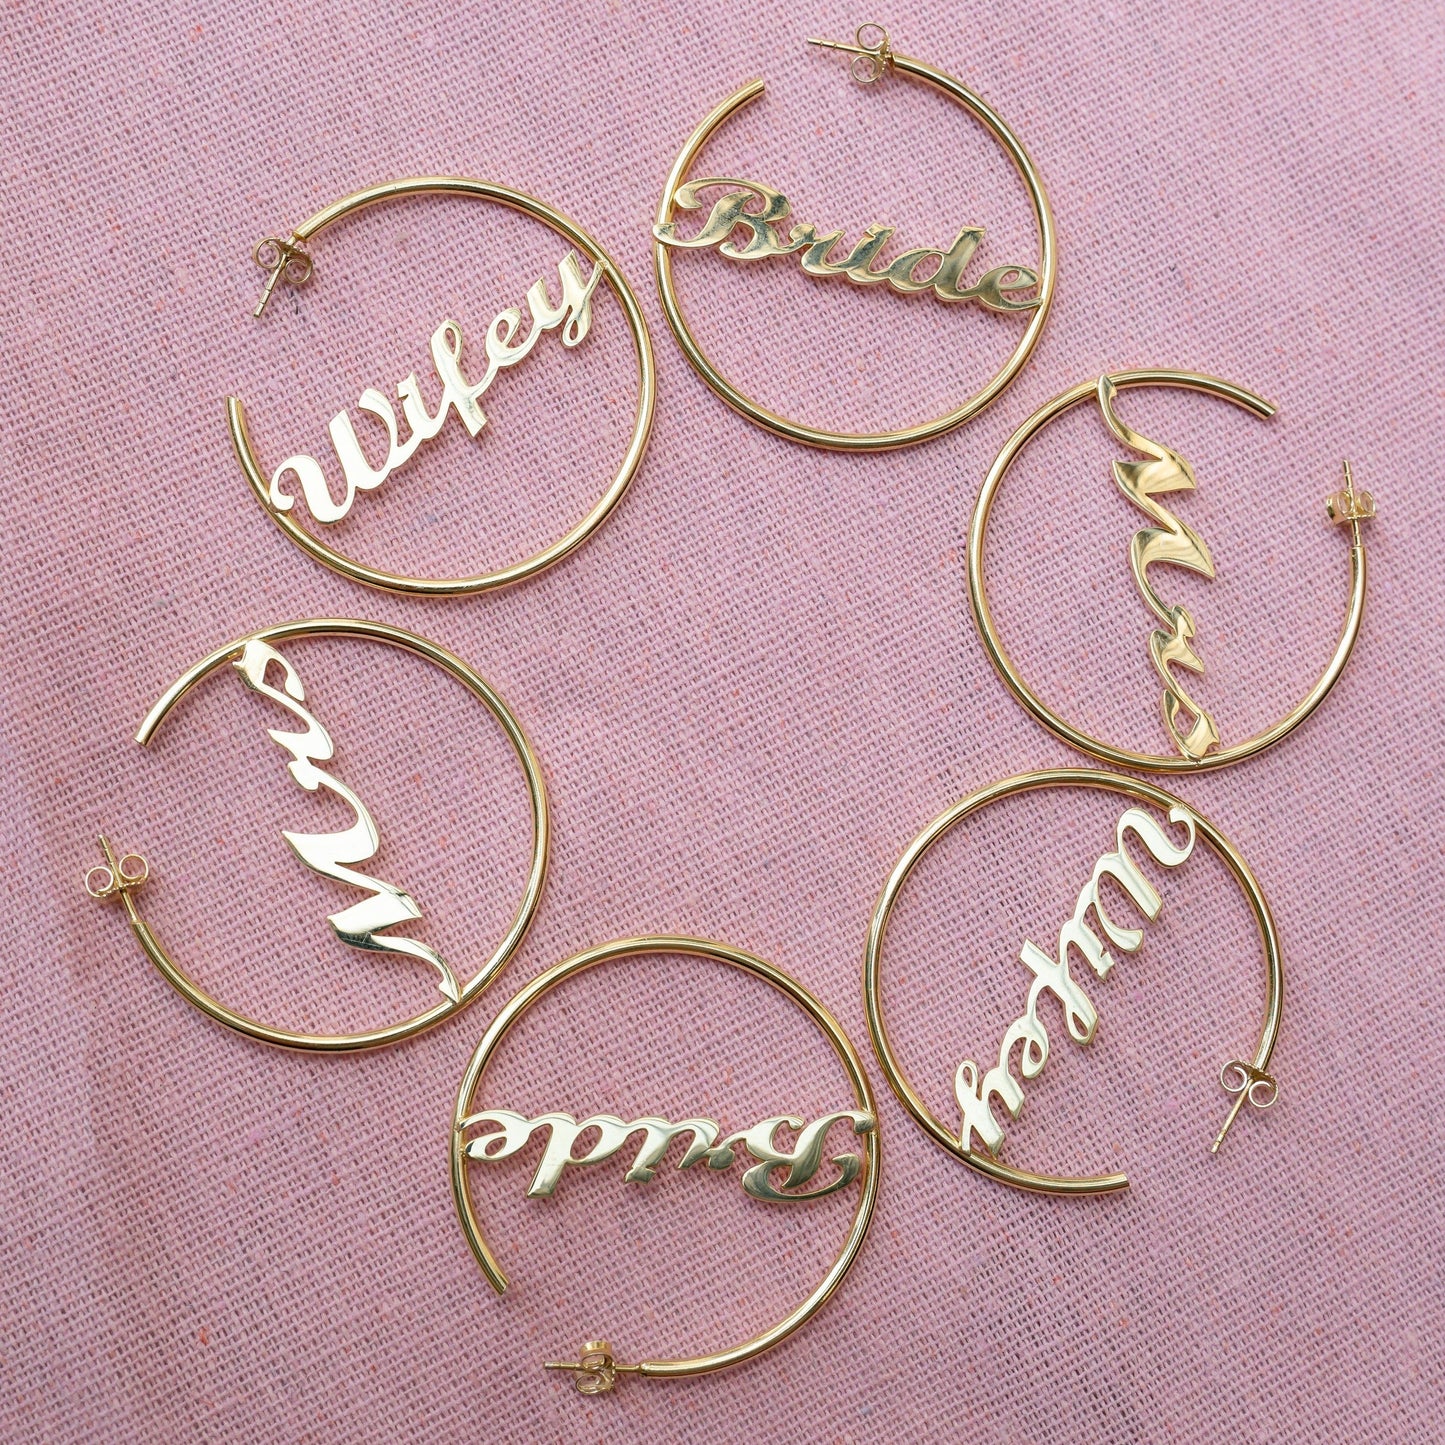 Mrs. Script Hoops - PREORDER JEWELRY The Sis Kiss